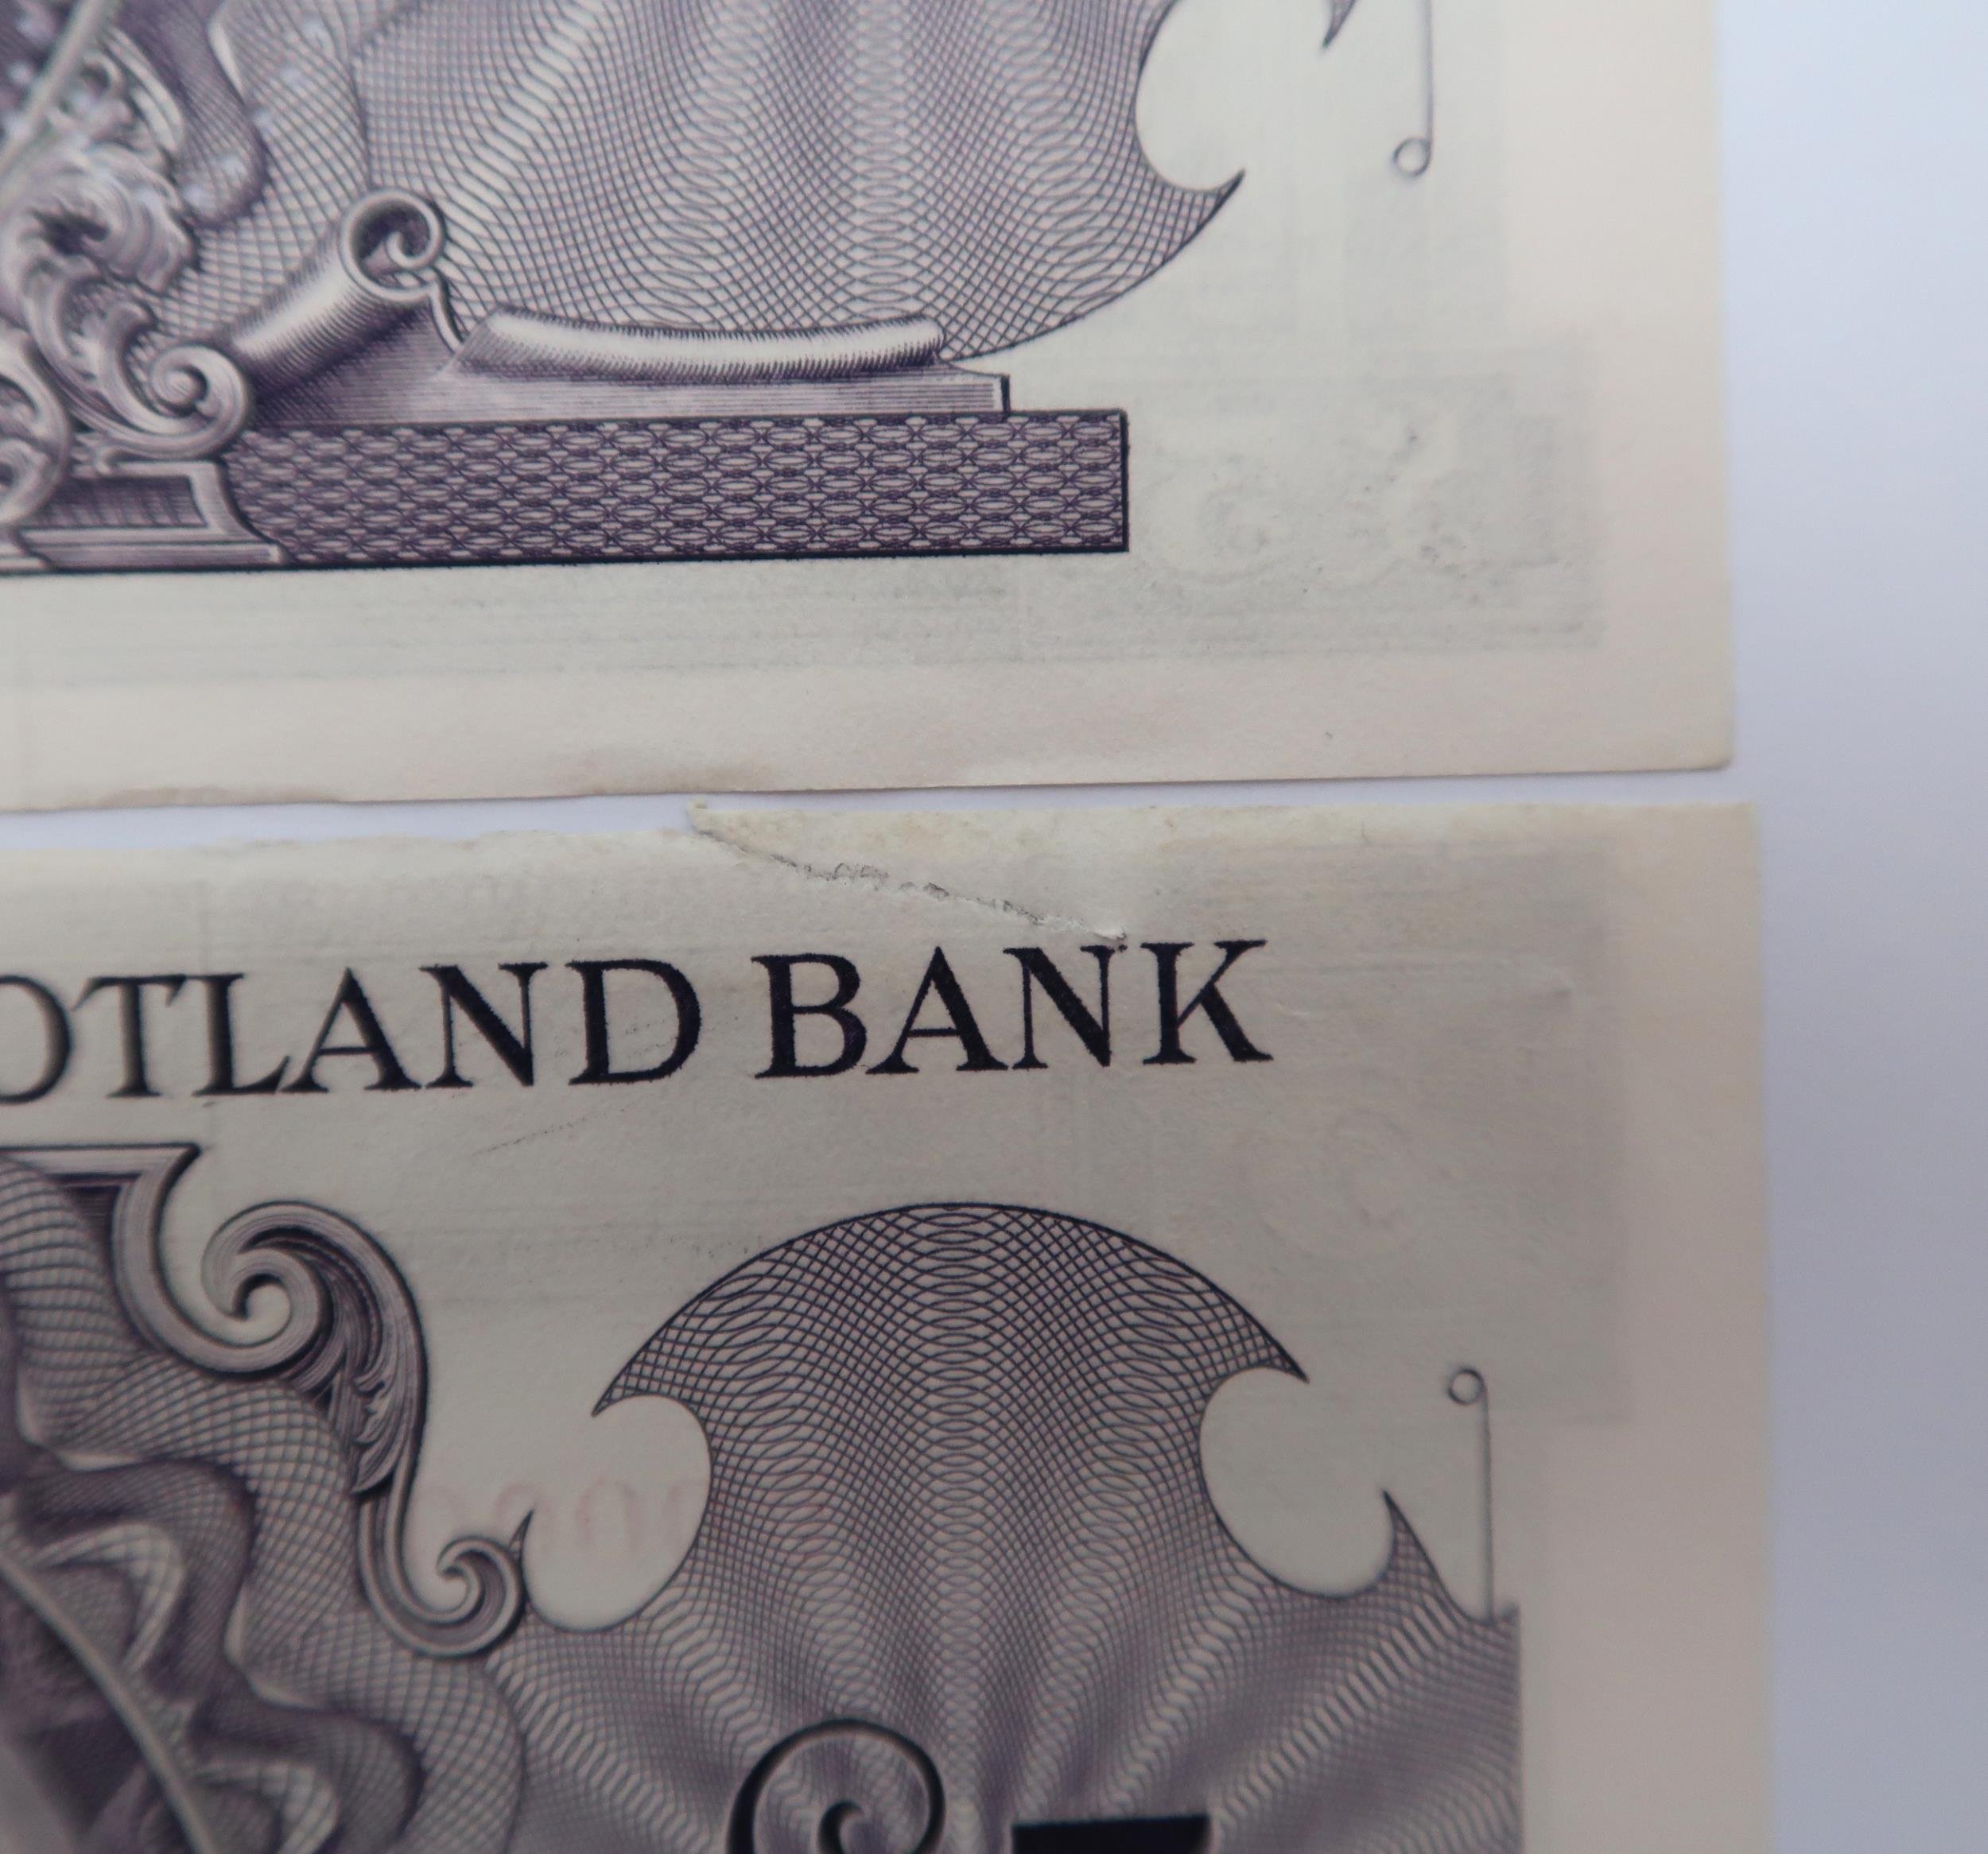 Clydesdale & North of Scotland Bank Limited specimen £5 note 2nd May 1951 Glasgow Campbell and a - Image 3 of 3